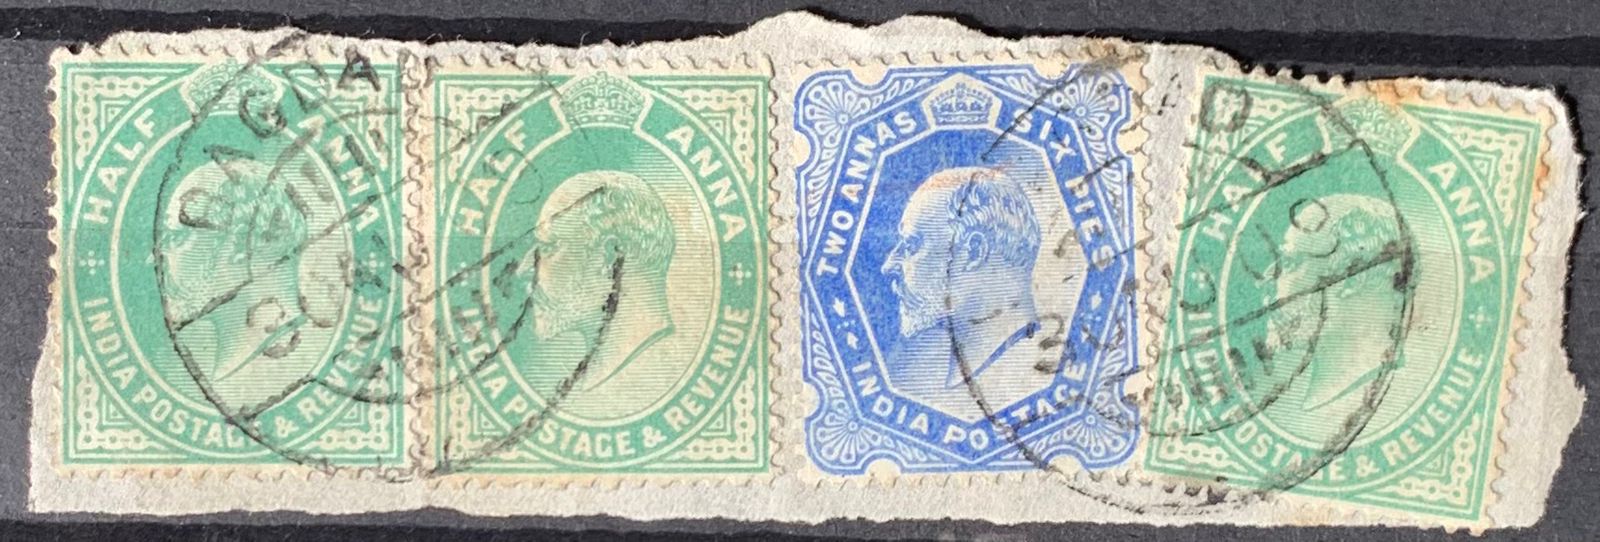 India 1902 KEVII Multiples Used Abroad in BAGDAD Fine Cancelled